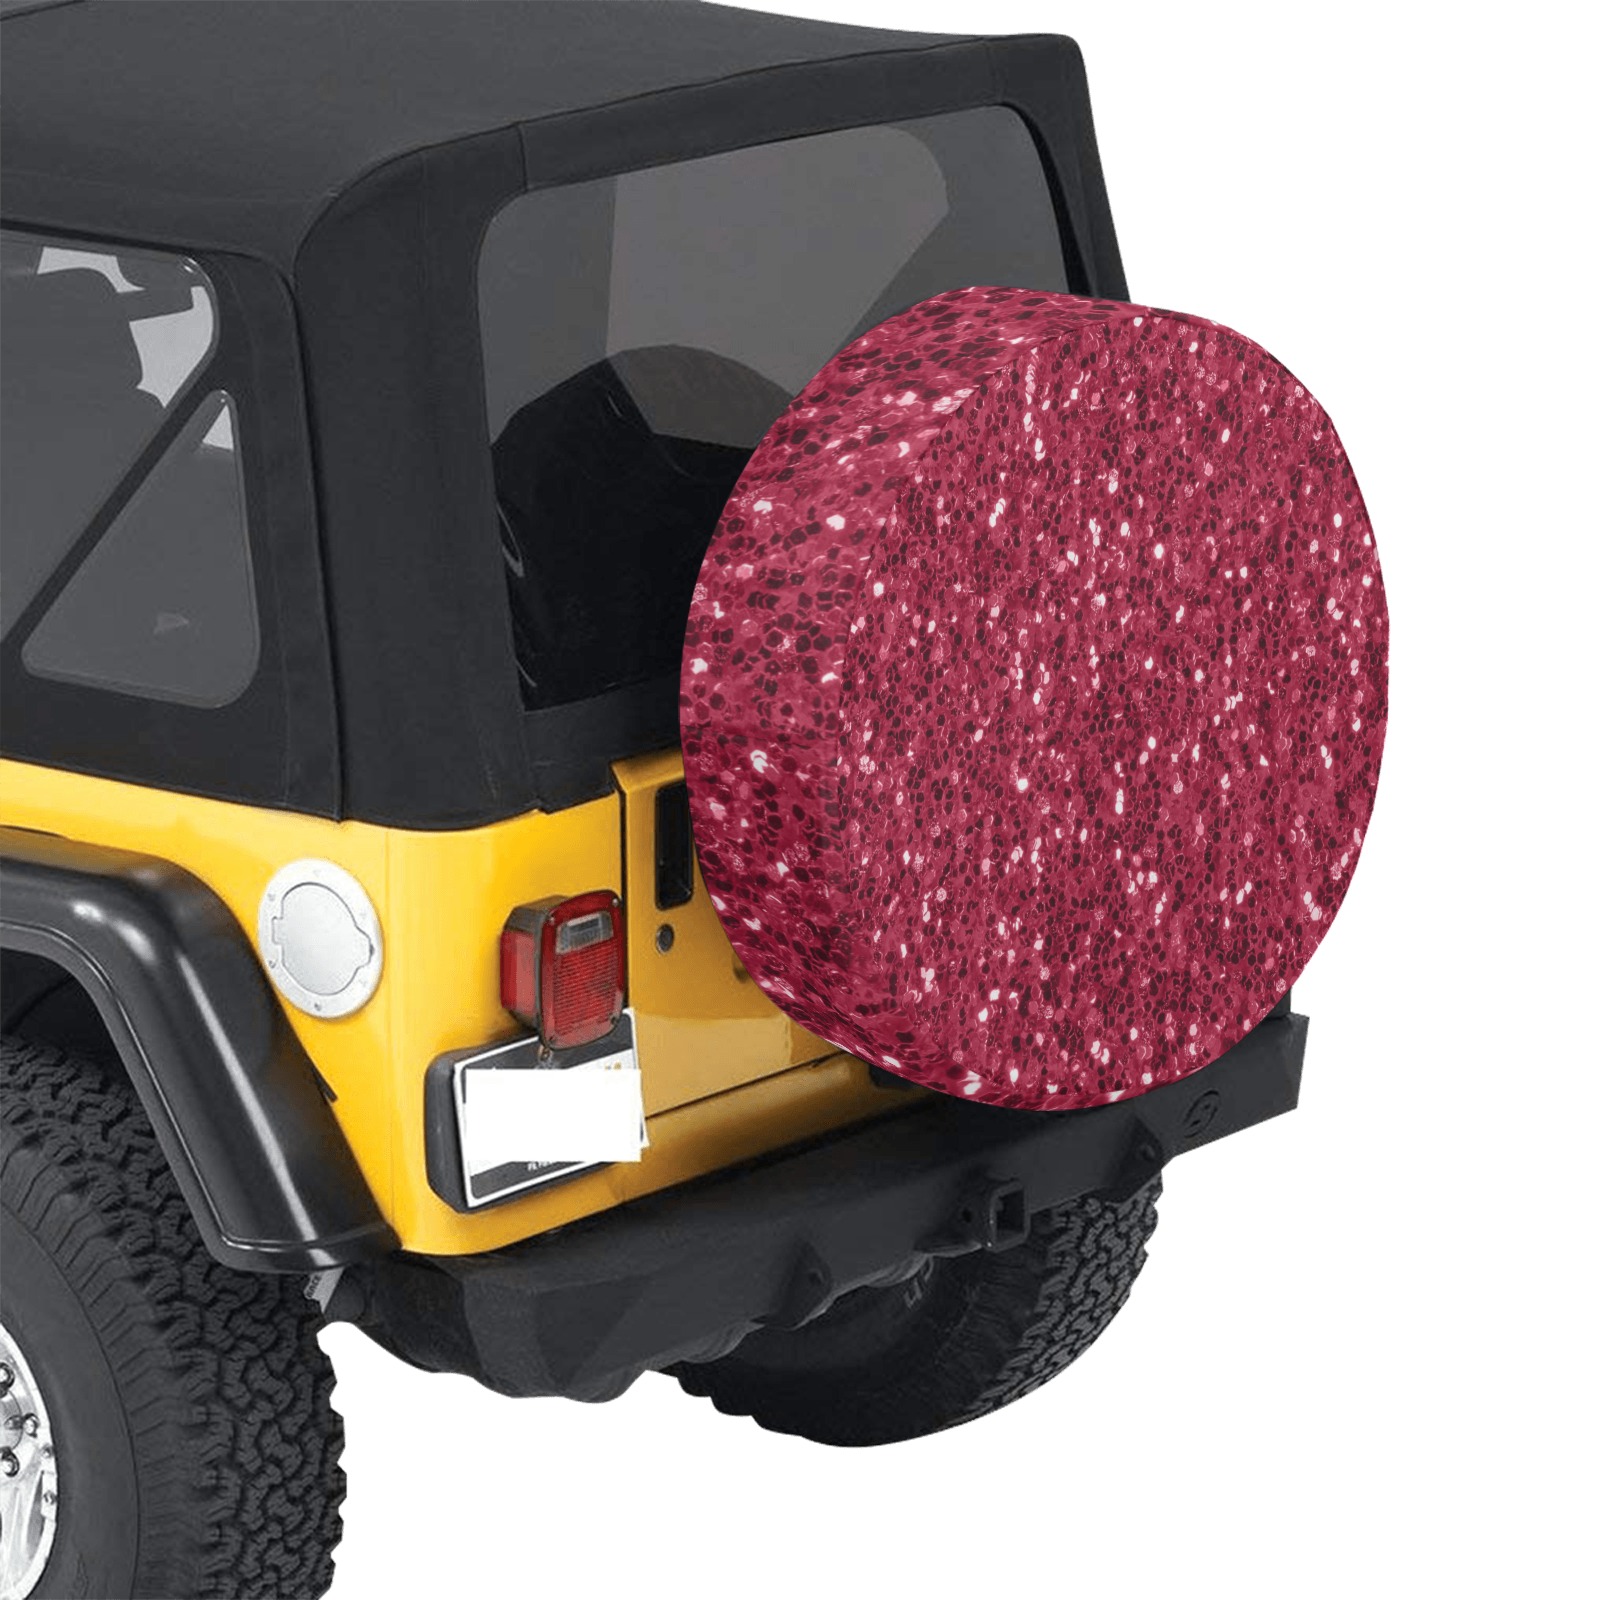 Magenta dark pink red faux sparkles glitter 30 Inch Spare Tire Cover